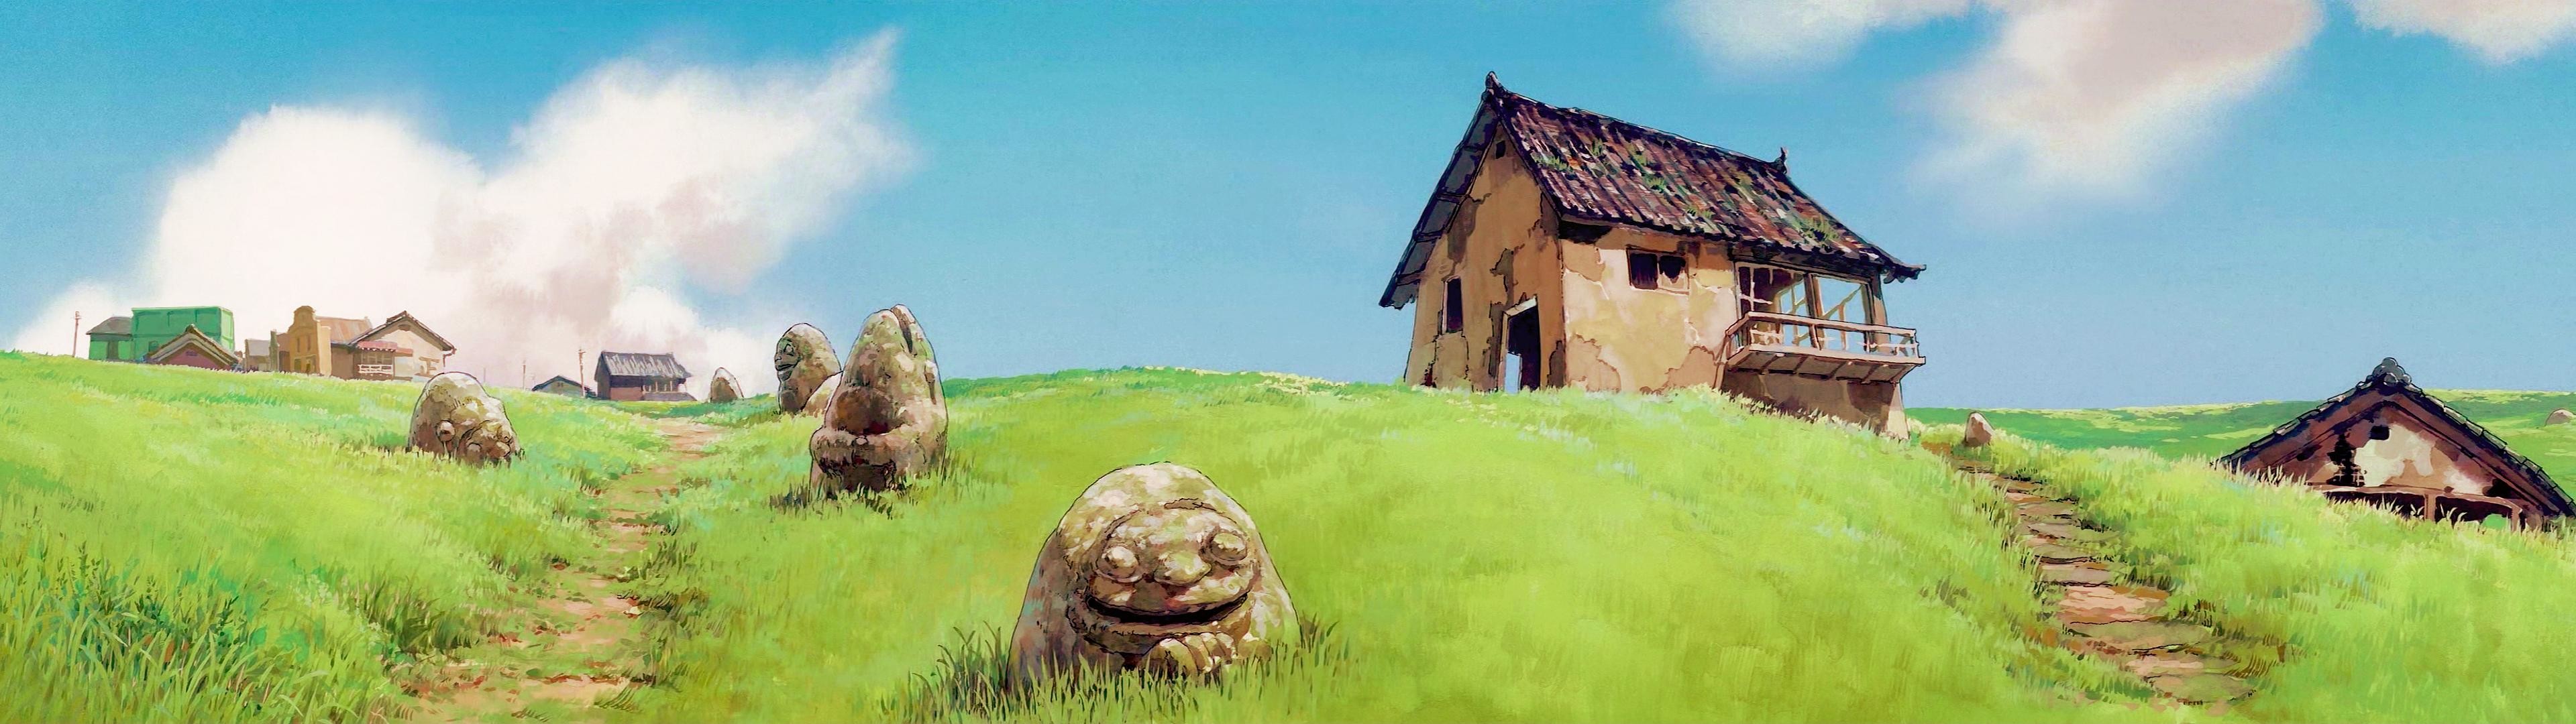 3840x1080 Reuploading the Dual Monitor Studio Ghibli Wallpapers I saw here a while  back, in case some people didn't get them. Spirited AwayEnvironment ...